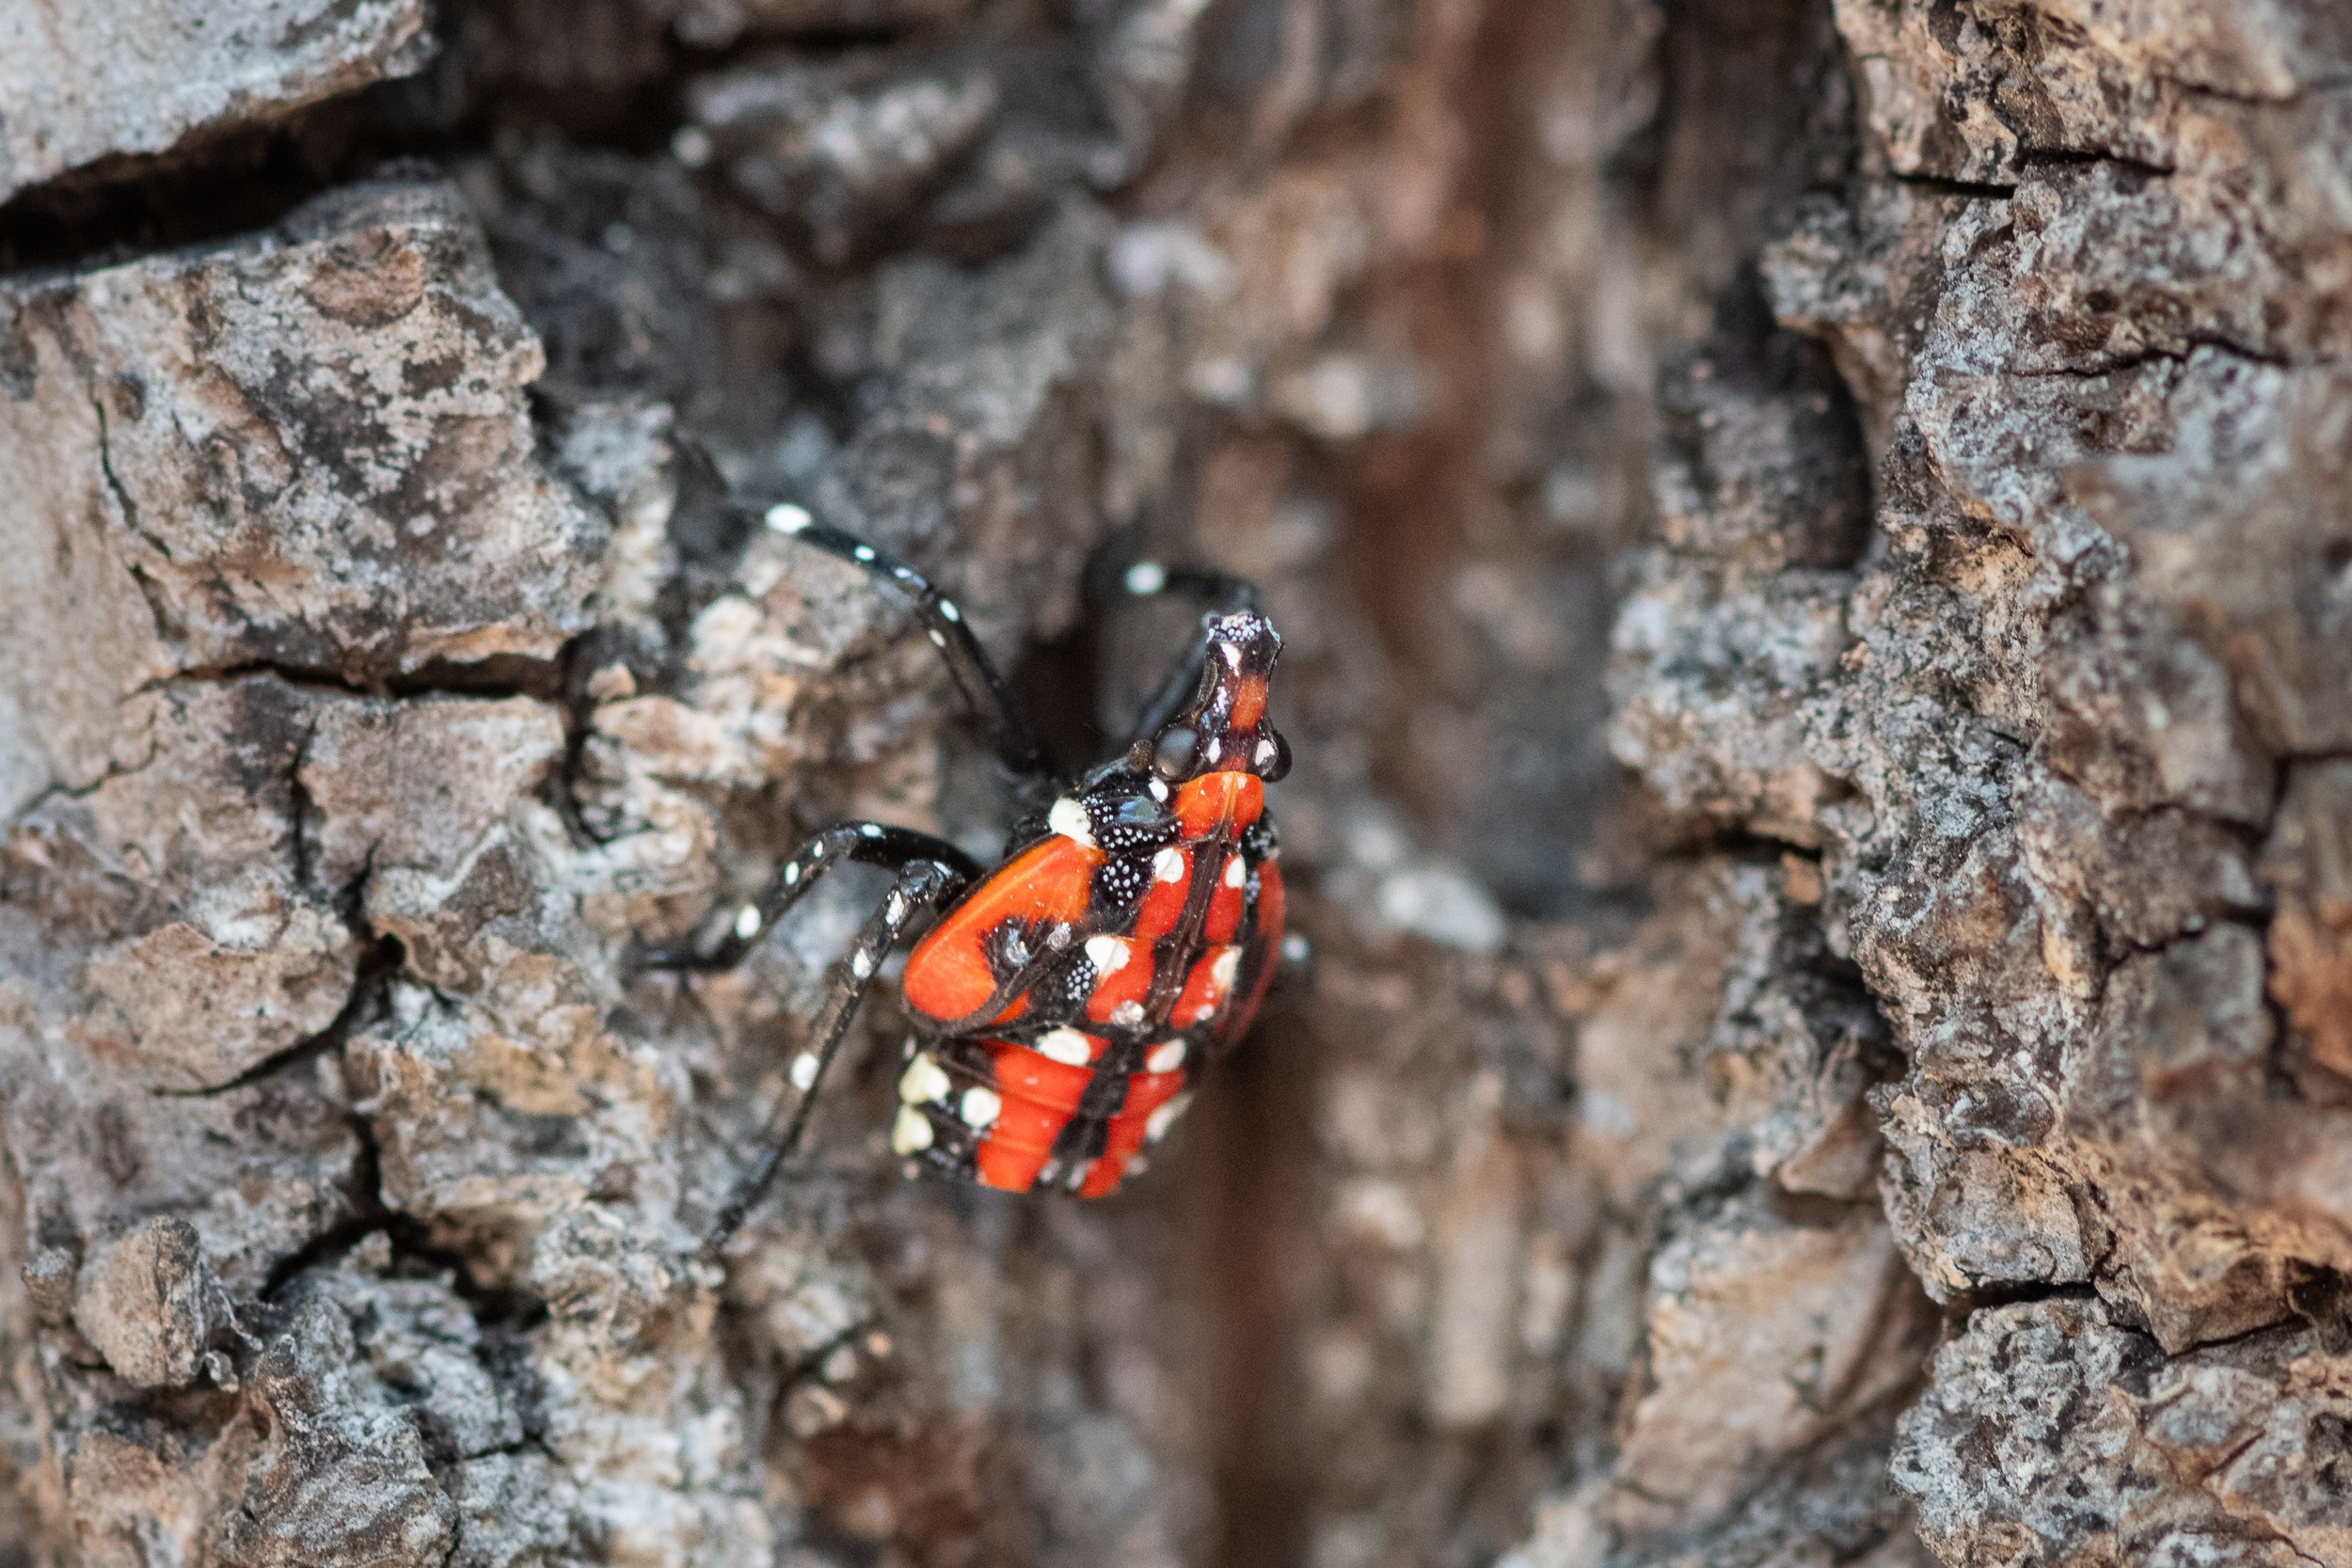 spotted-lanternfly-nymph-final-stage_THP.jpg